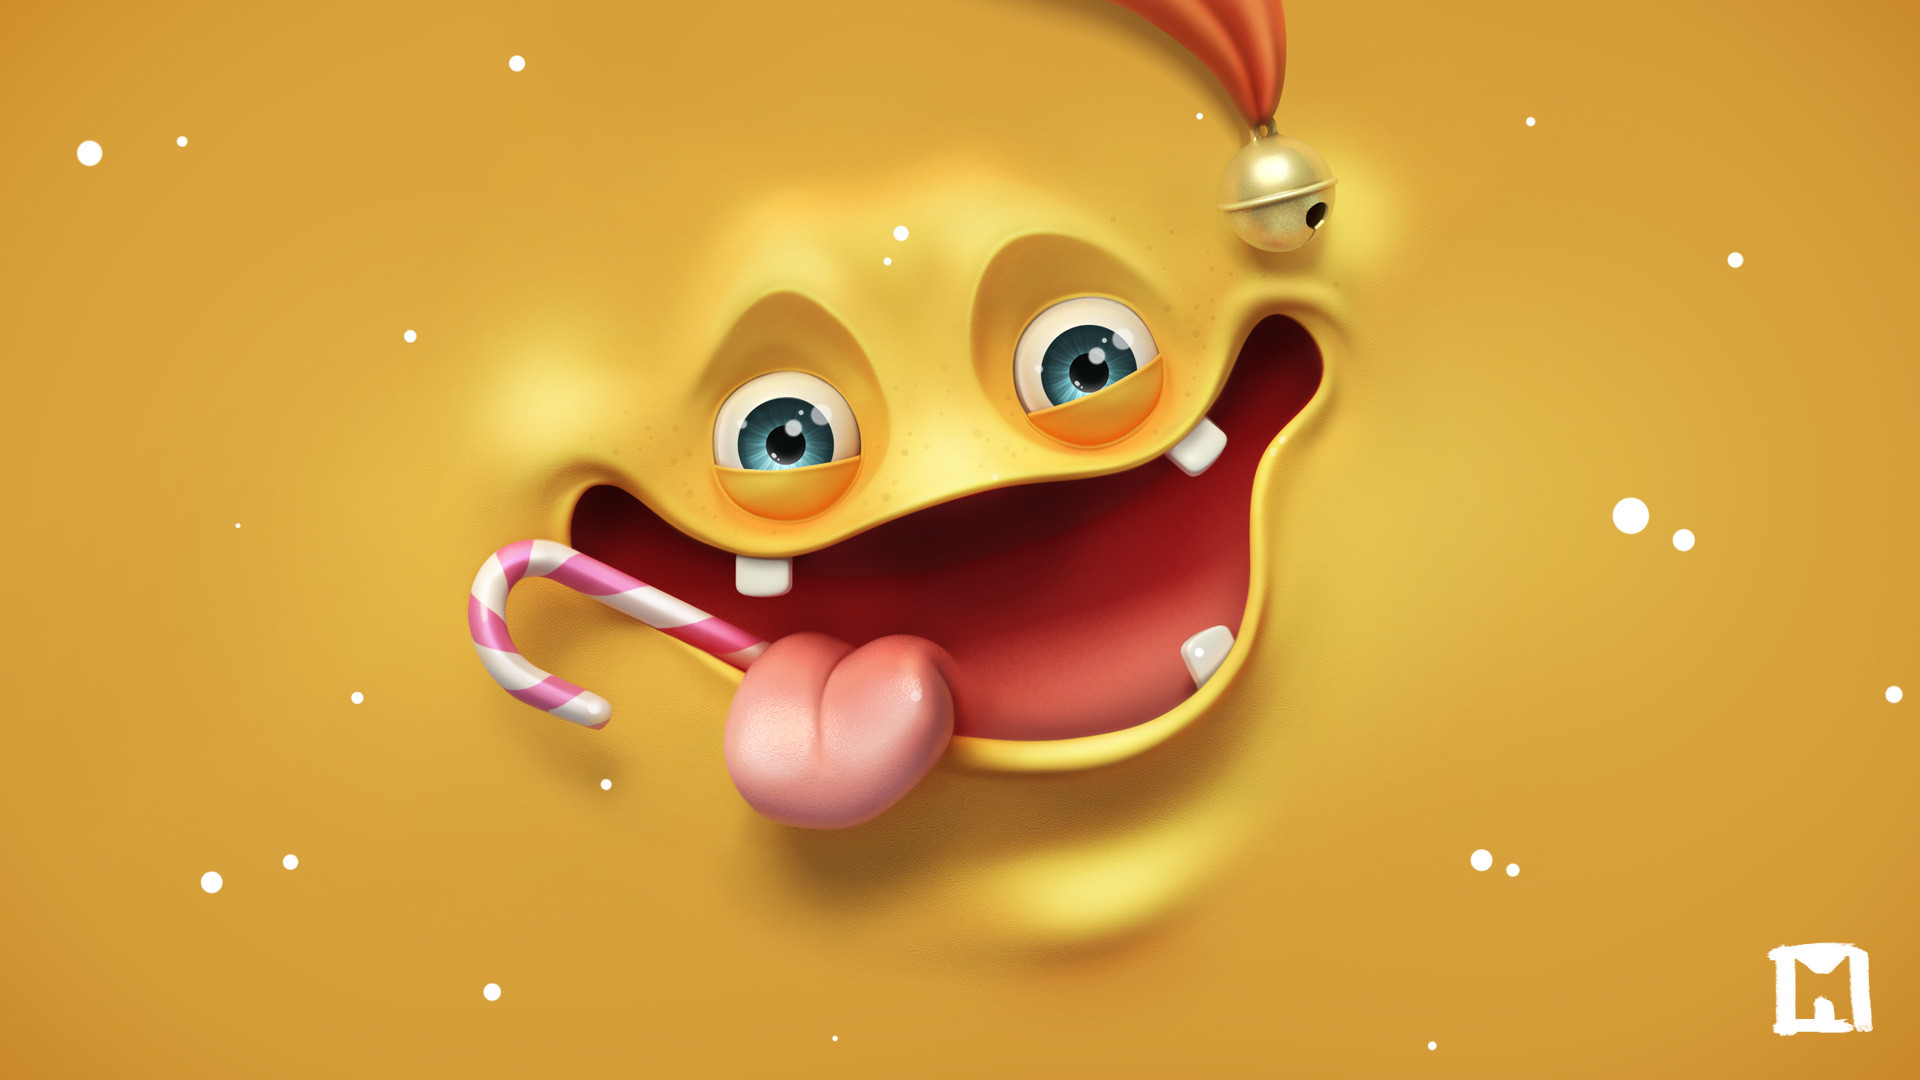 1920x1080 538 best EMOTICONS images on Pinterest | Emojis, Smiley faces and .